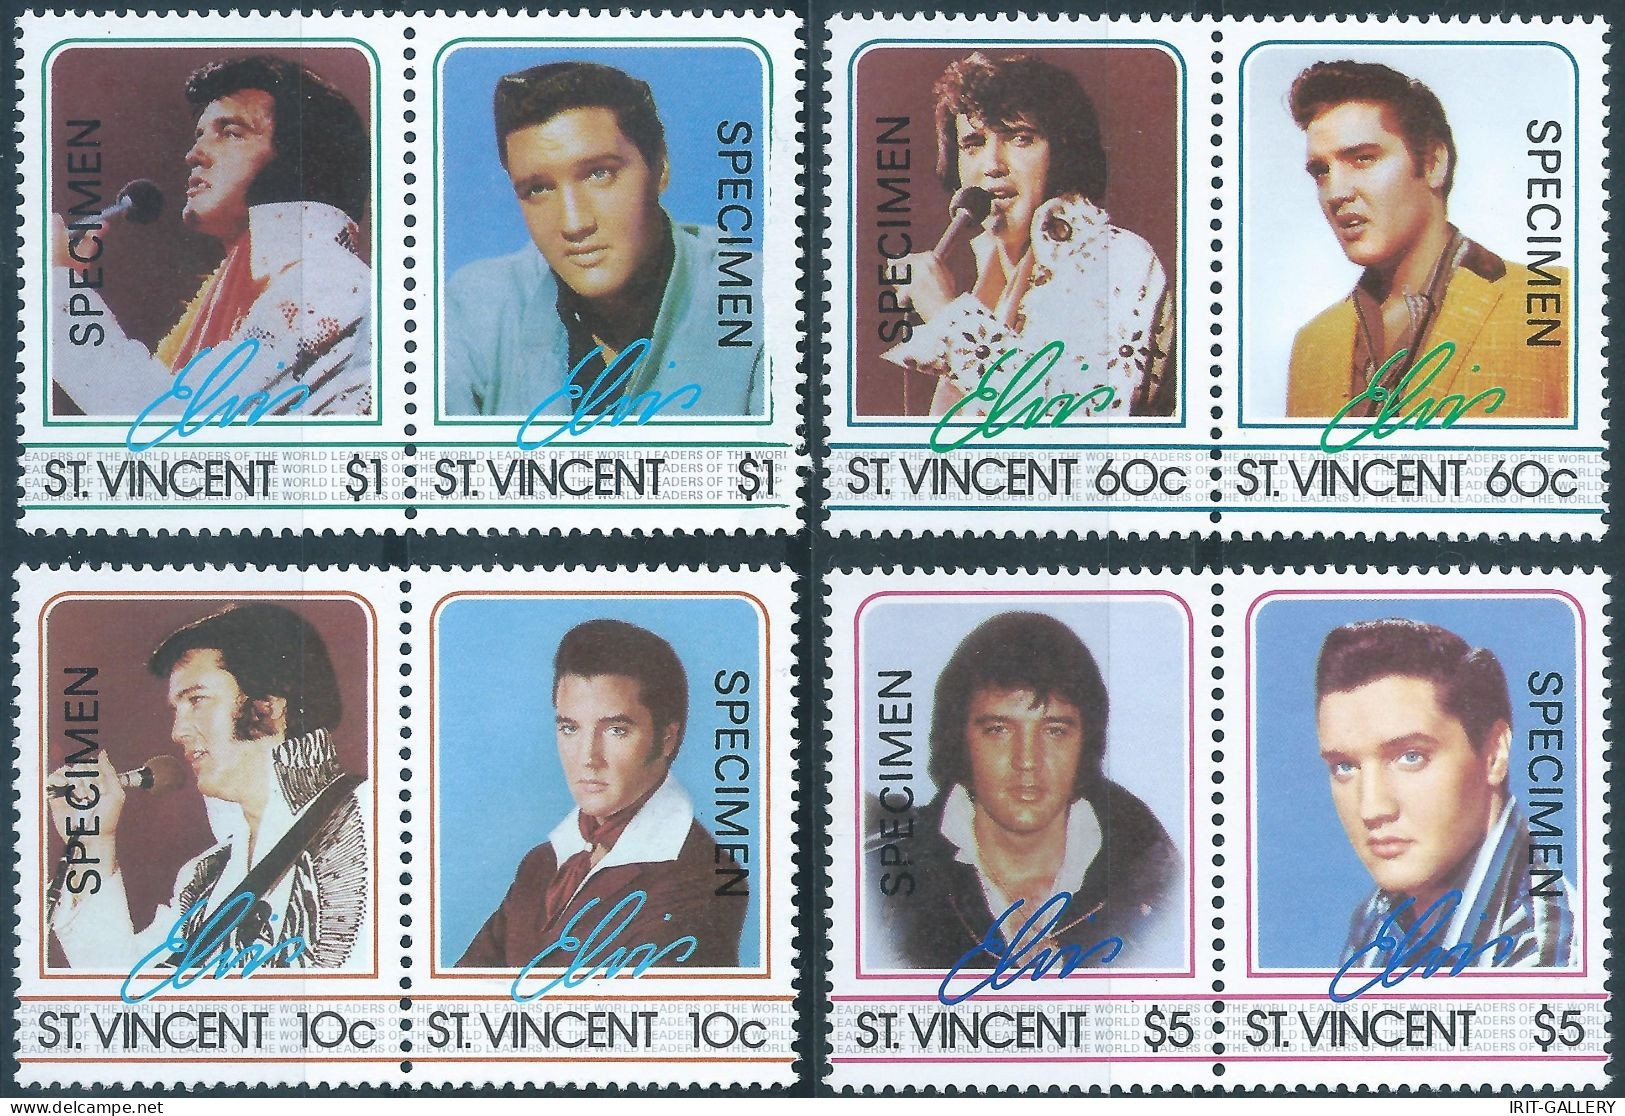 St.Vincent 1985 The 50th Anniversary Of The Birth Of Elvis Presley, 1935-1977 (Specimen Overprinted)-MNH - Music